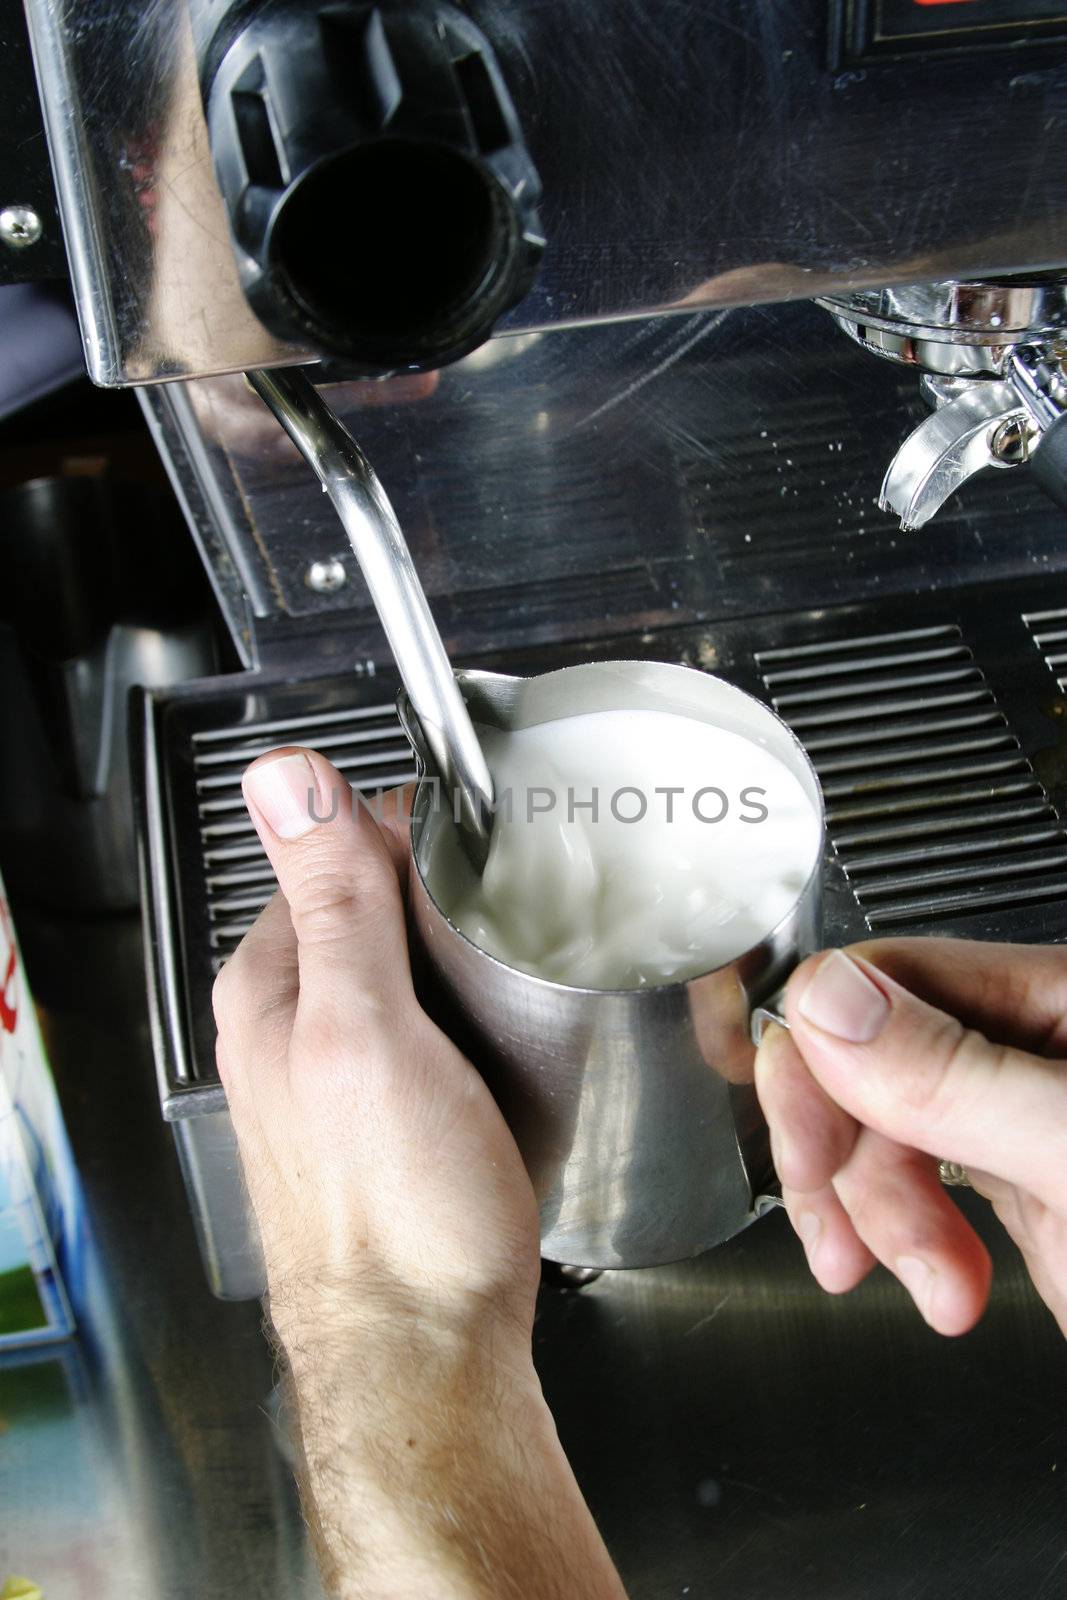 A professional barista is steaming milk for a cafe latte